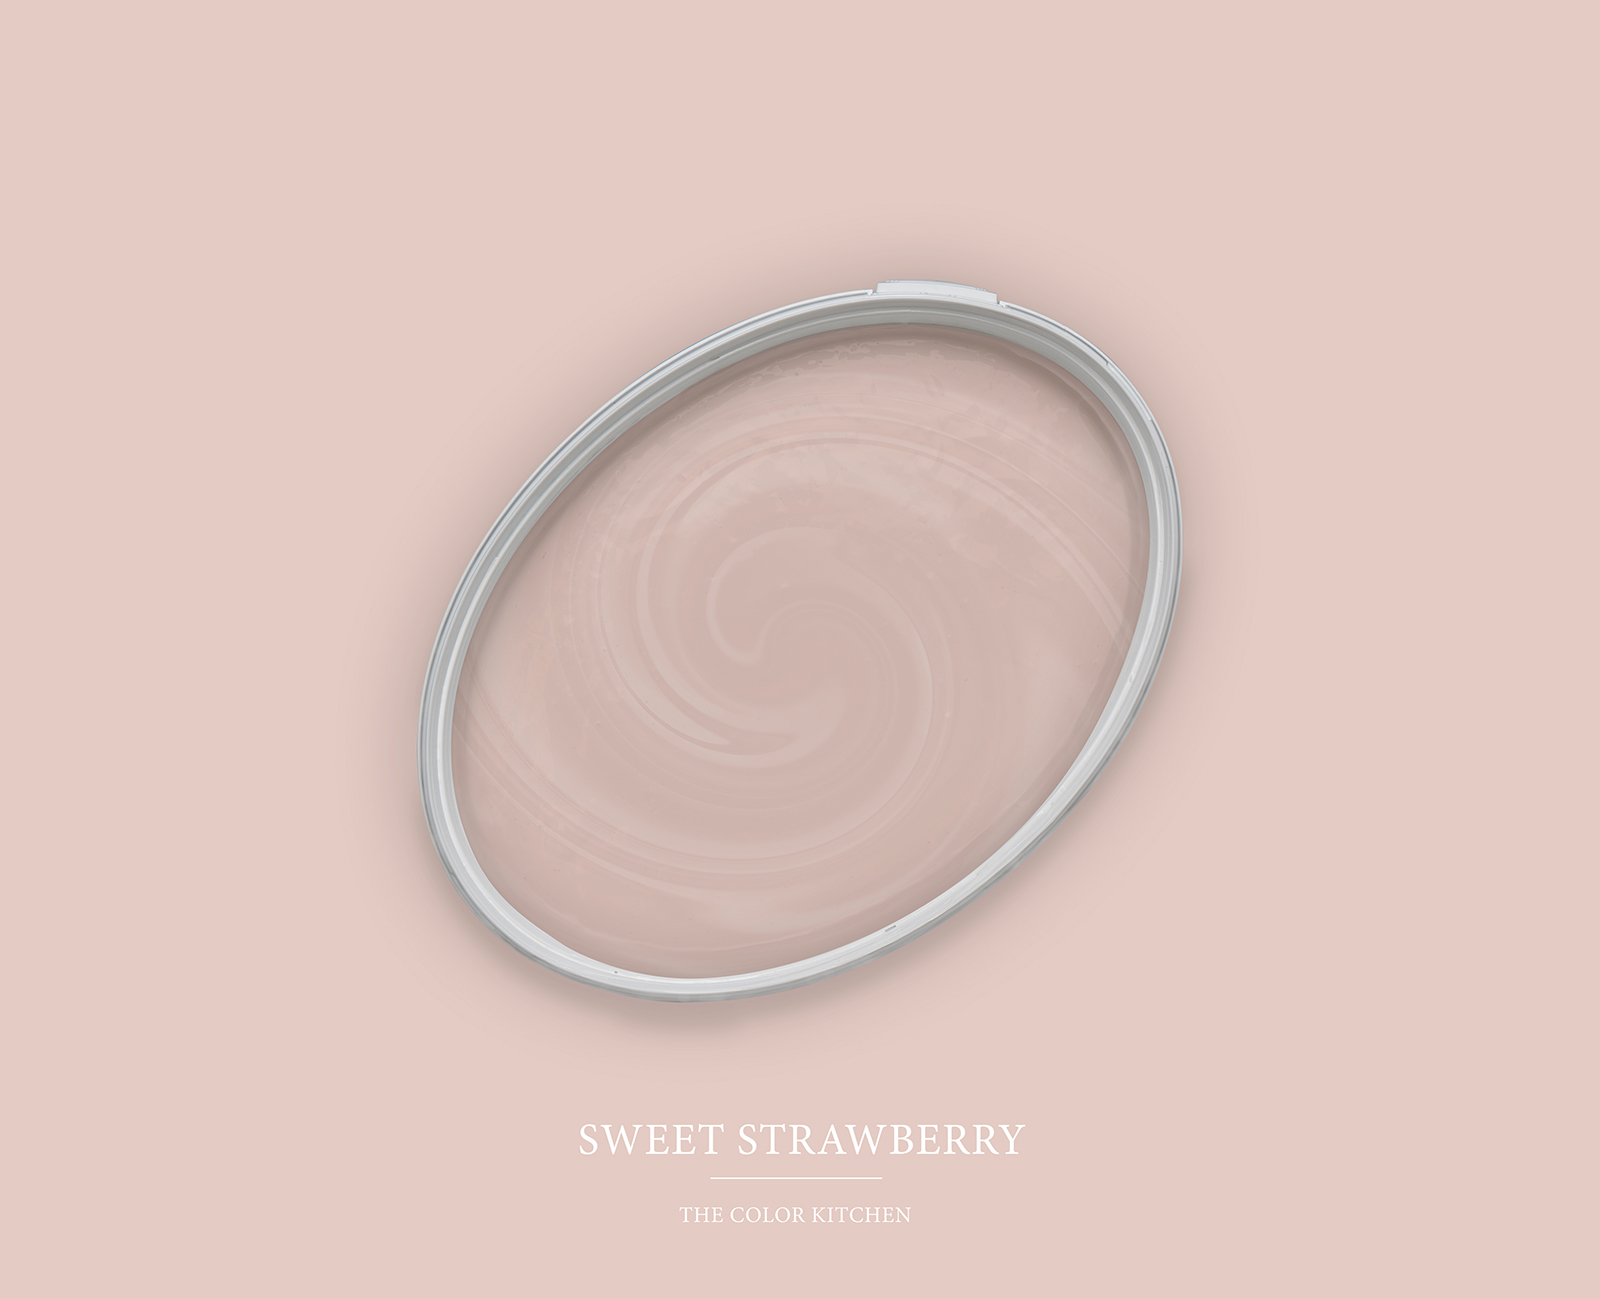         Wall Paint TCK7007 »Sweet Strawberry» an interplay of pink and beige – 2.5 litre
    